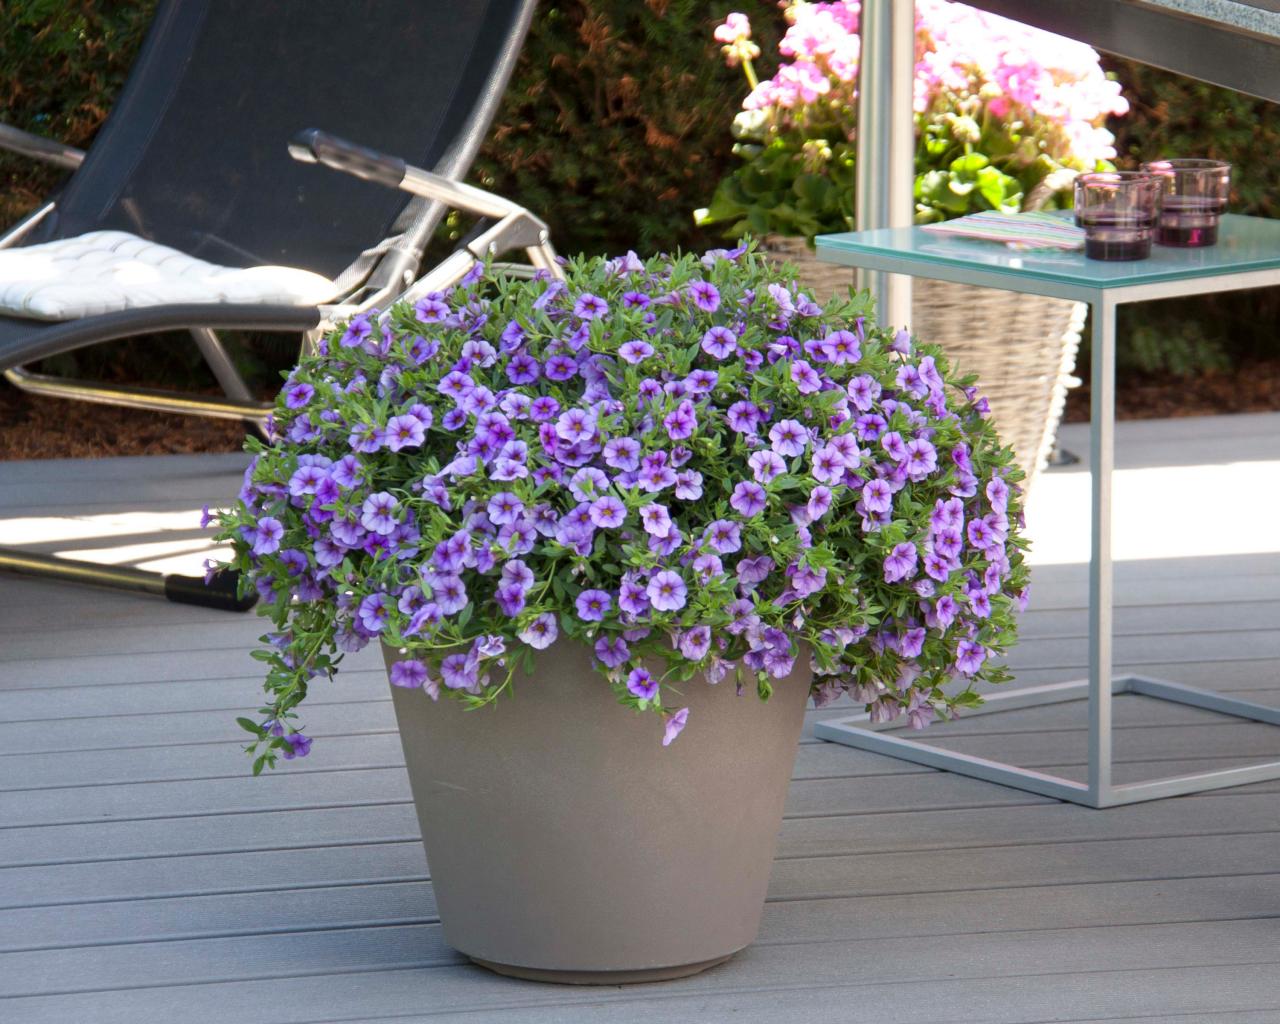 calibrachoa: how to plant, grow and care for million bells flower